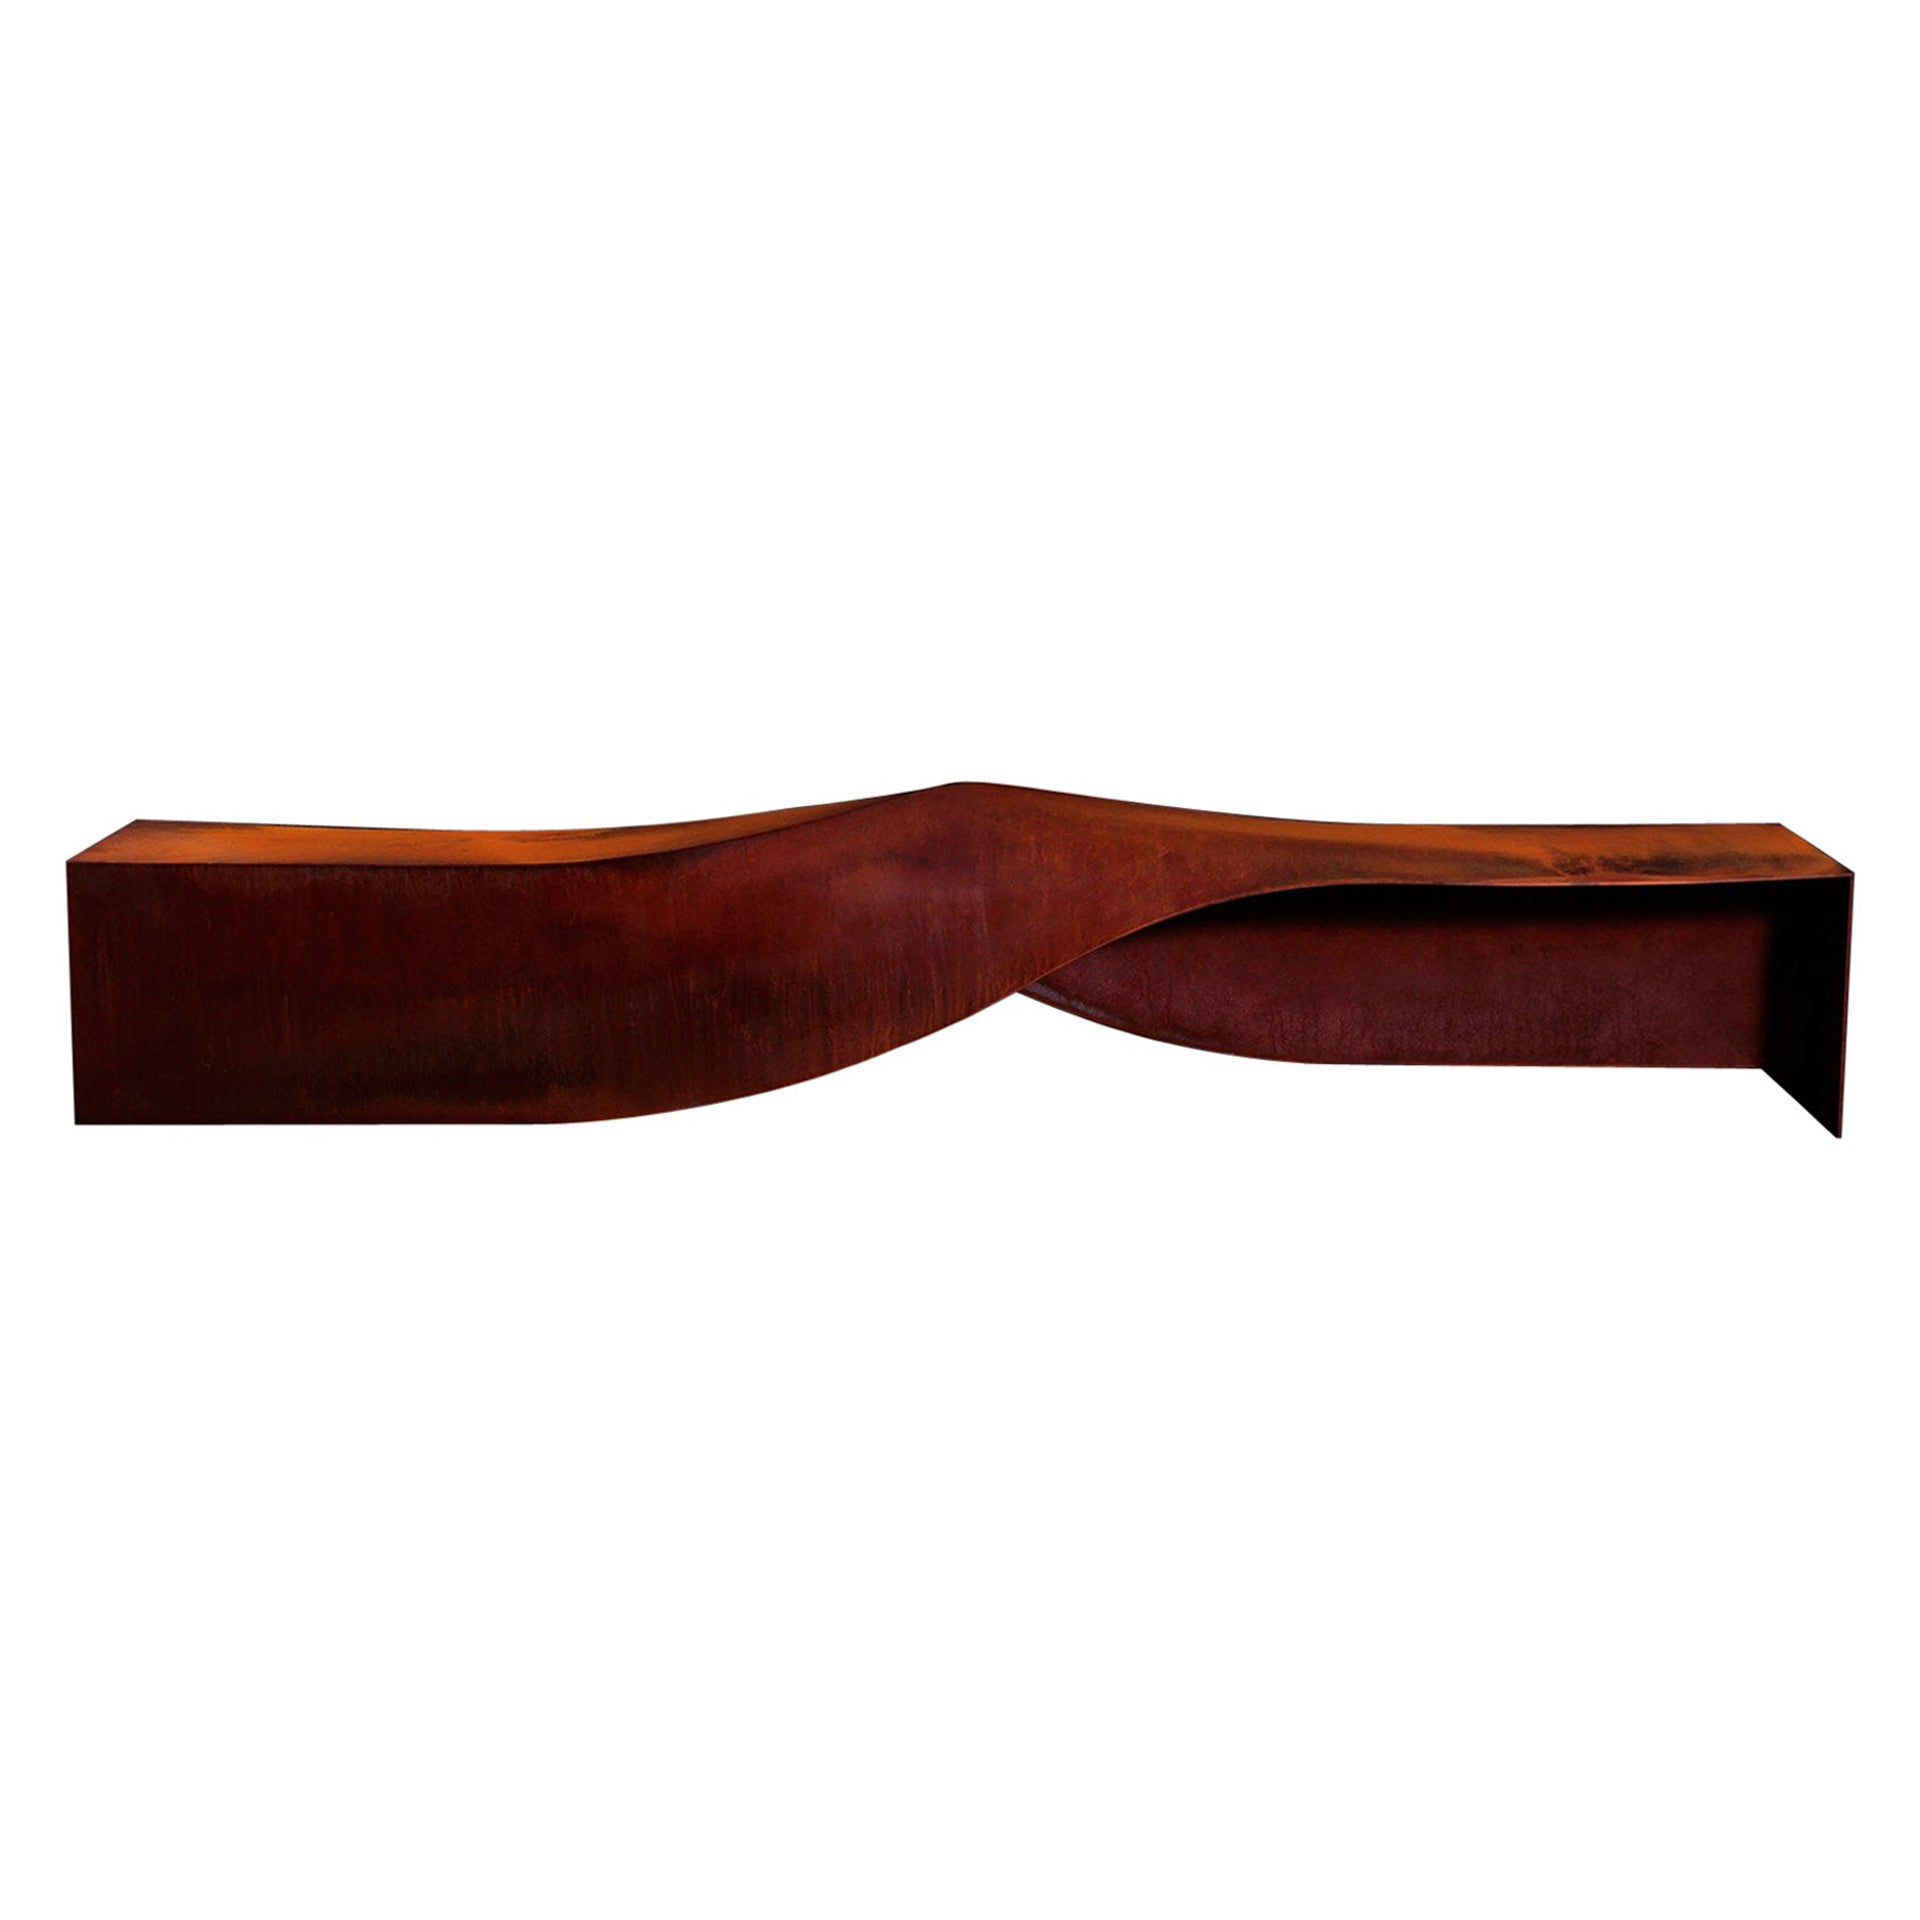 Soul Sculpture COR-Ten Steel Bench Large by Veronica Mar For Sale